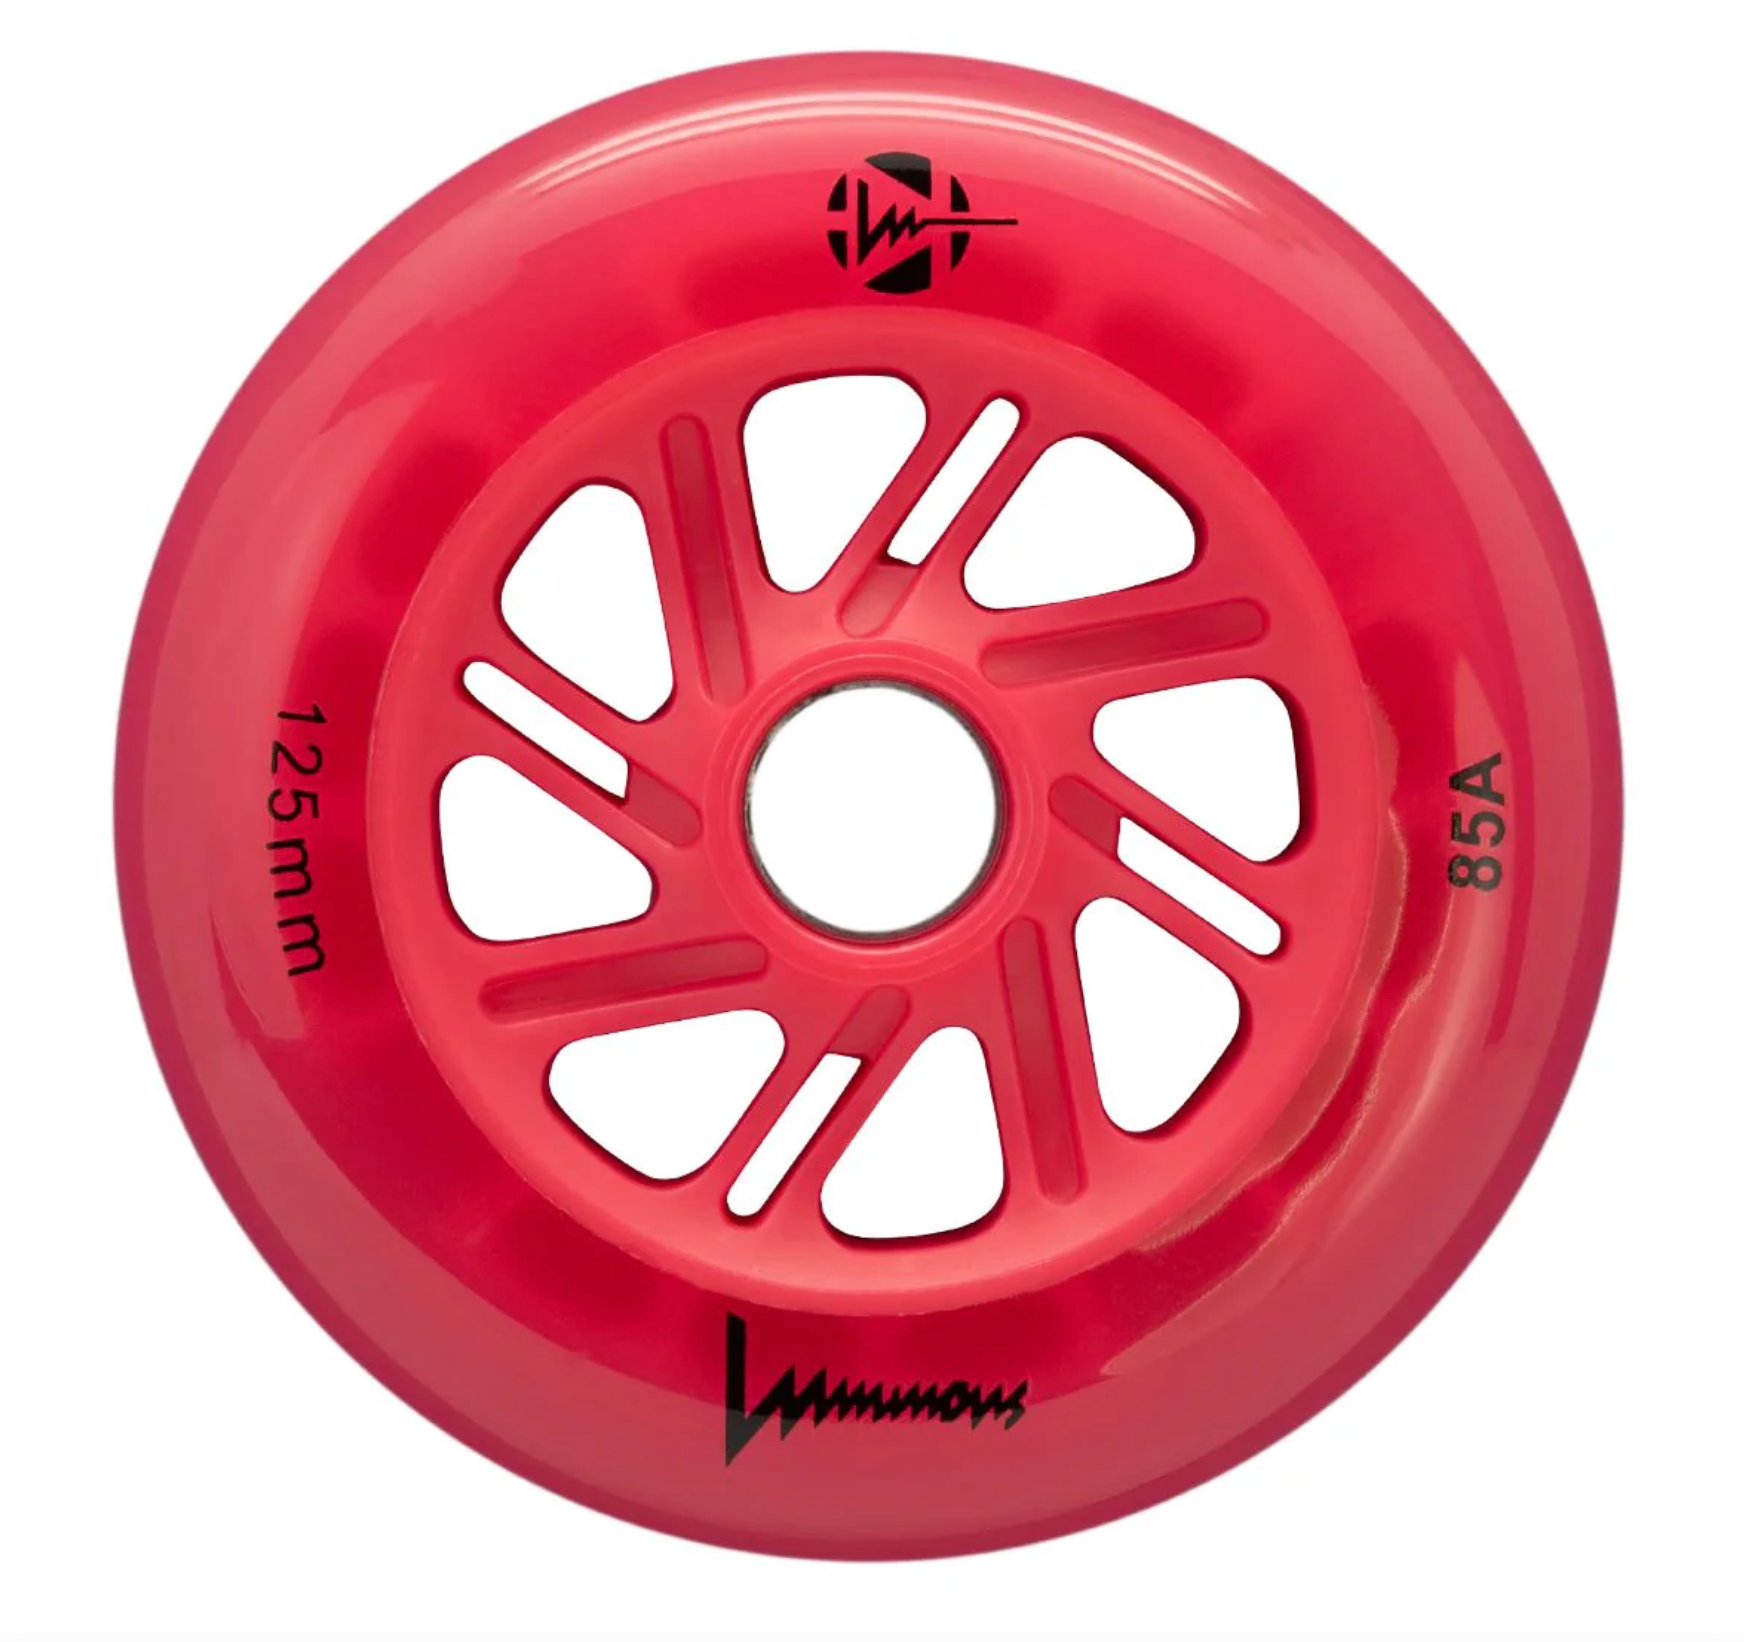 Luminous 125mm Red Red Inline Skate Wheels, Intuition Skate Shop, Skate Shops Near Me